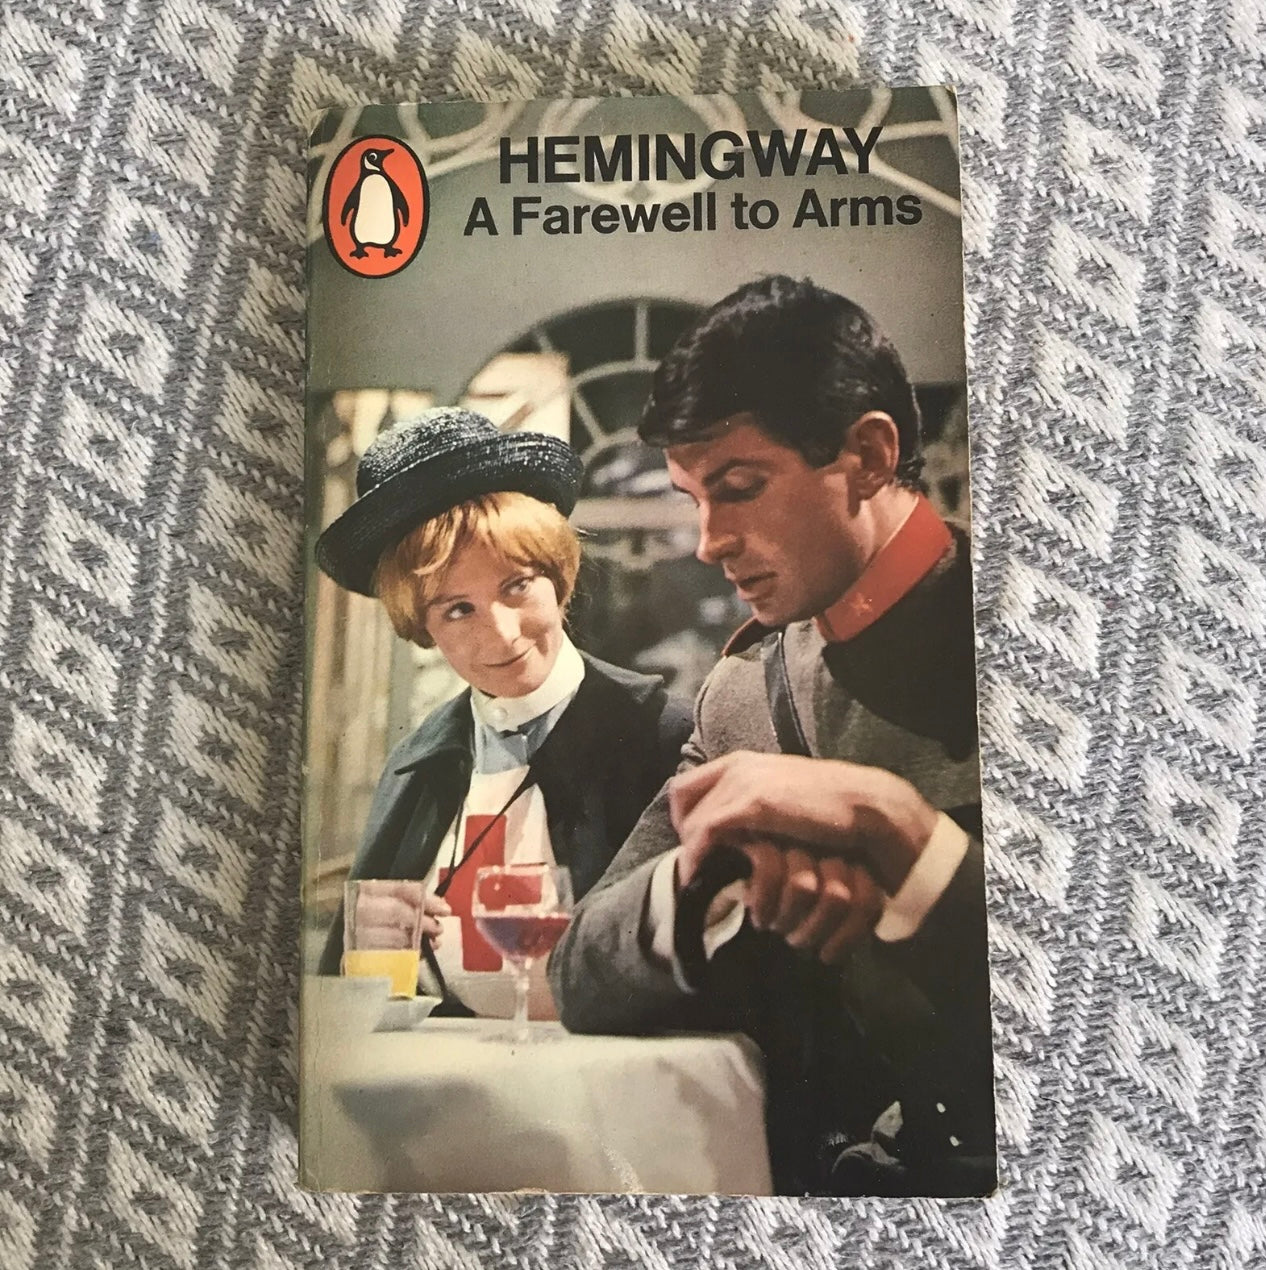 1967 A Farewell To Arms - Ernest Hemingway (Penguin)